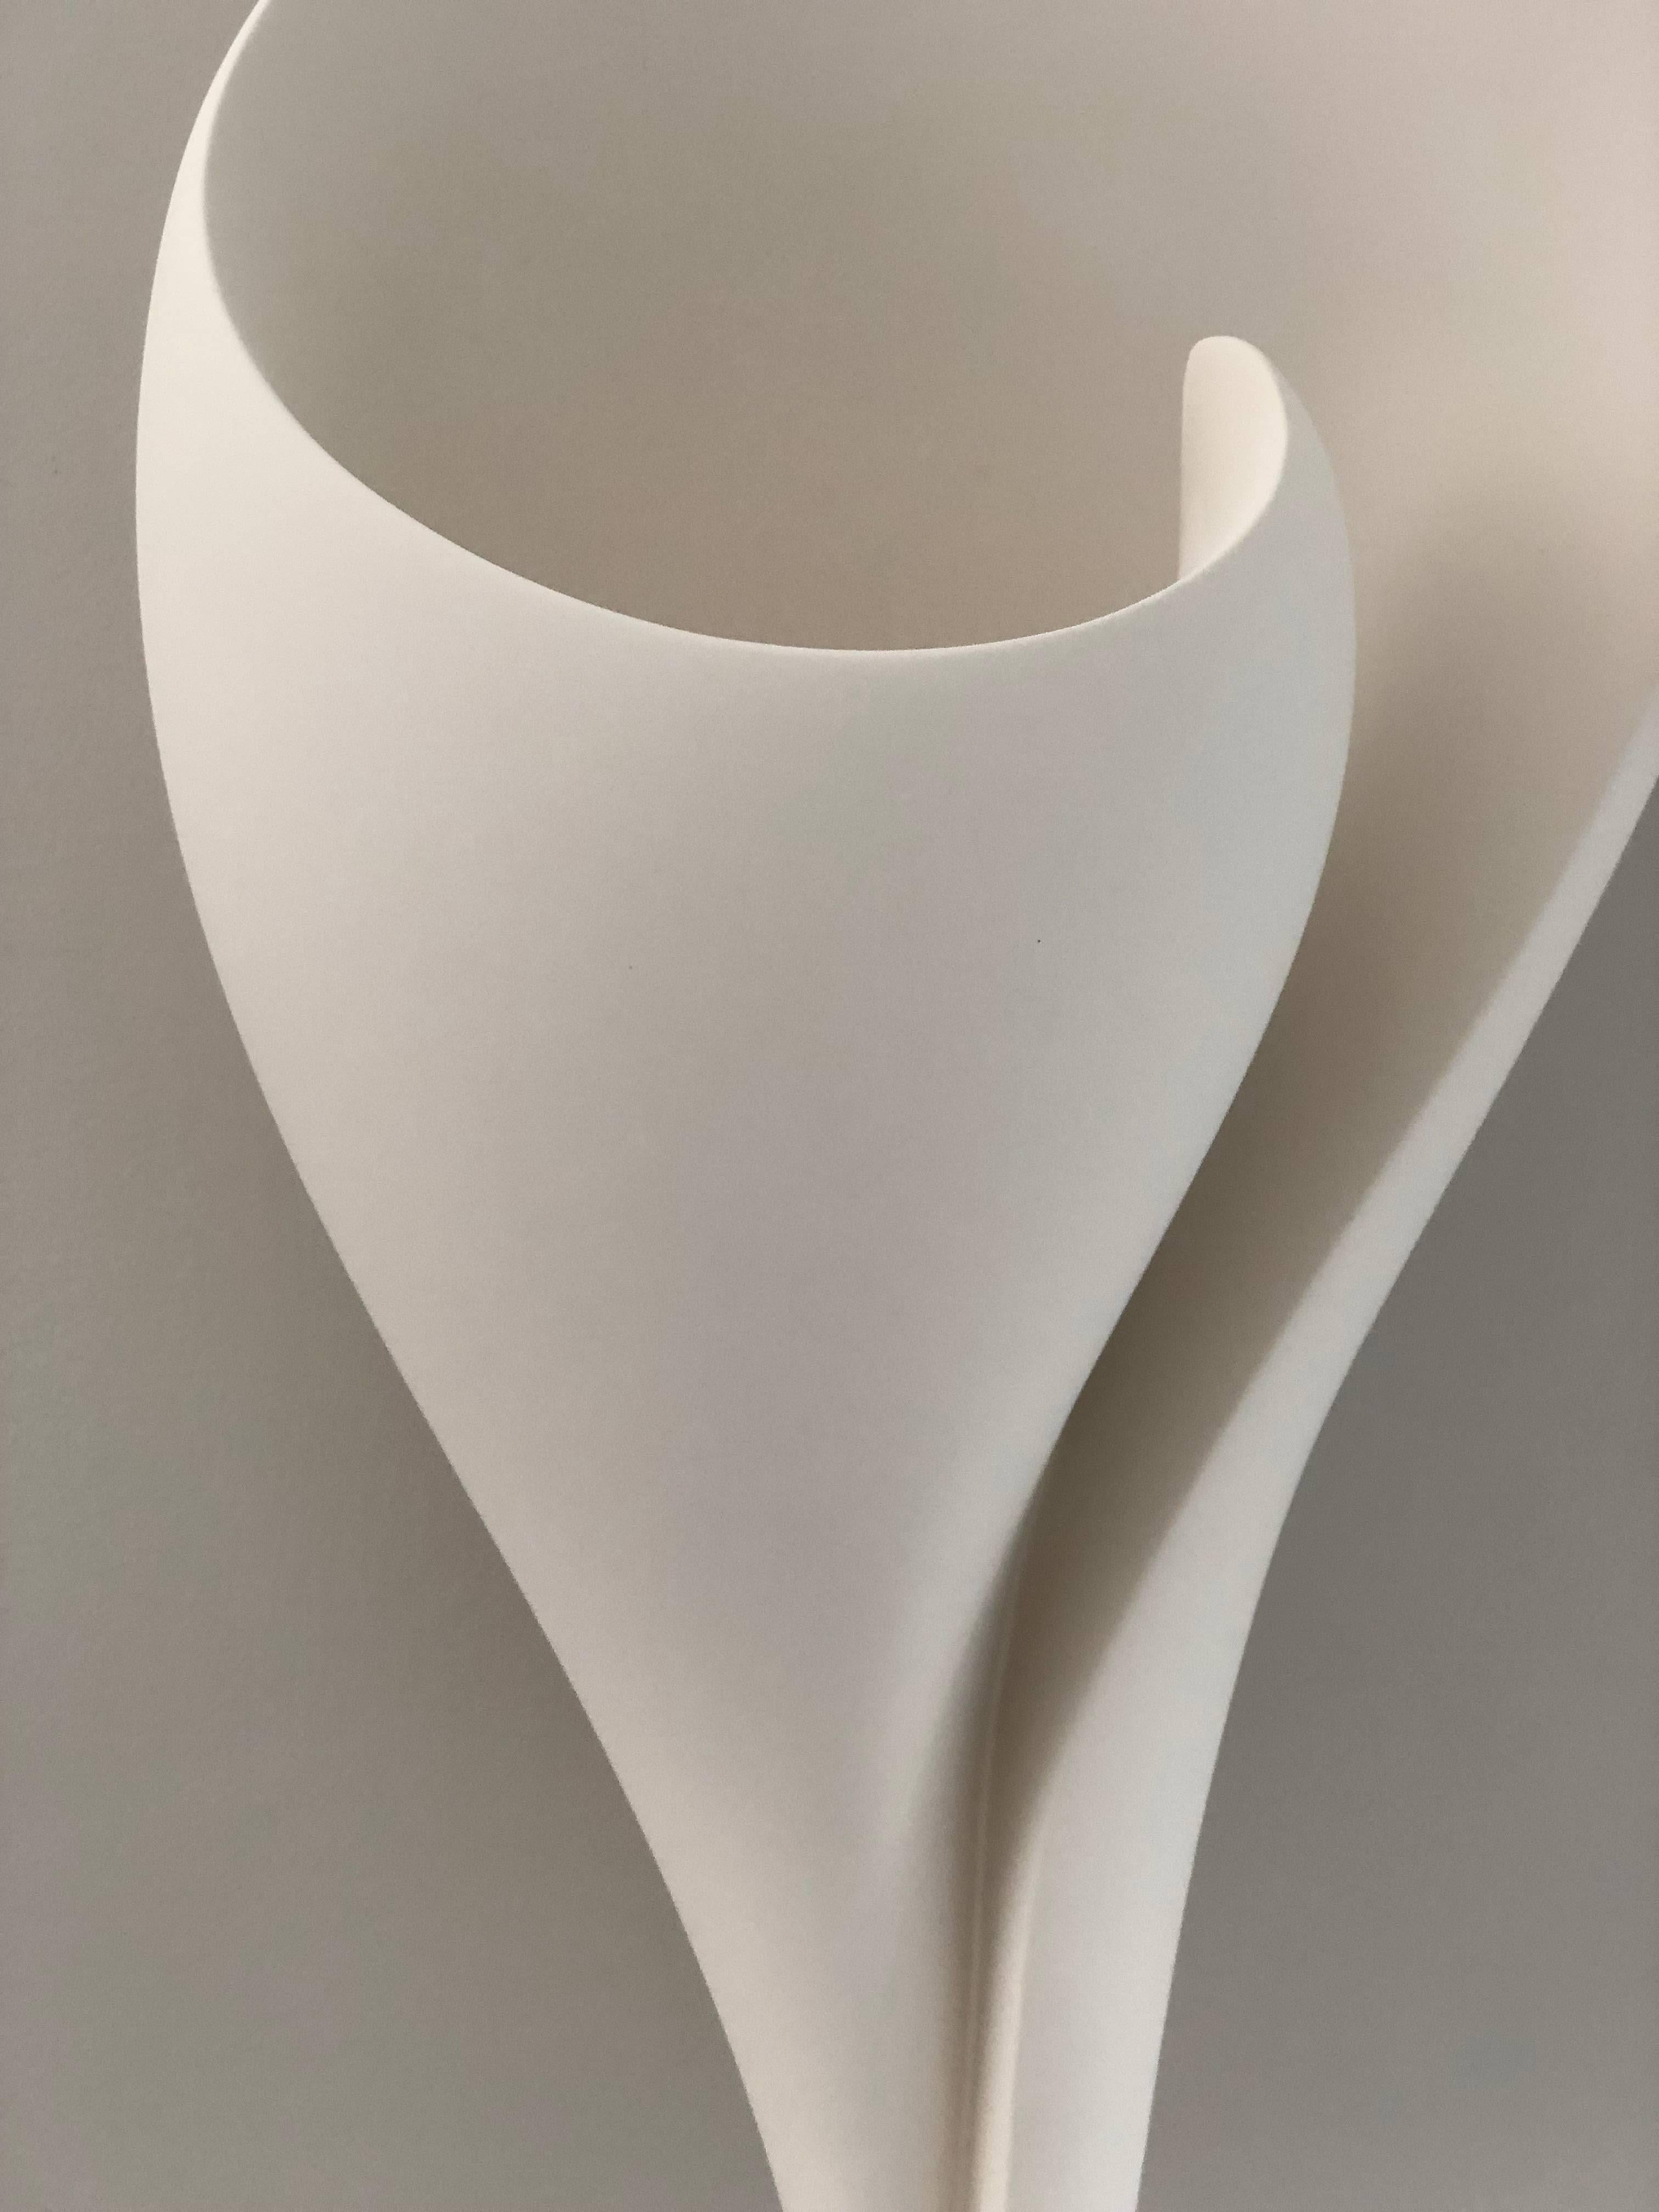 Molded Handmade Monumental Shell Wall-Mounted Sculpture White Plaster, Hannah Woodhouse For Sale